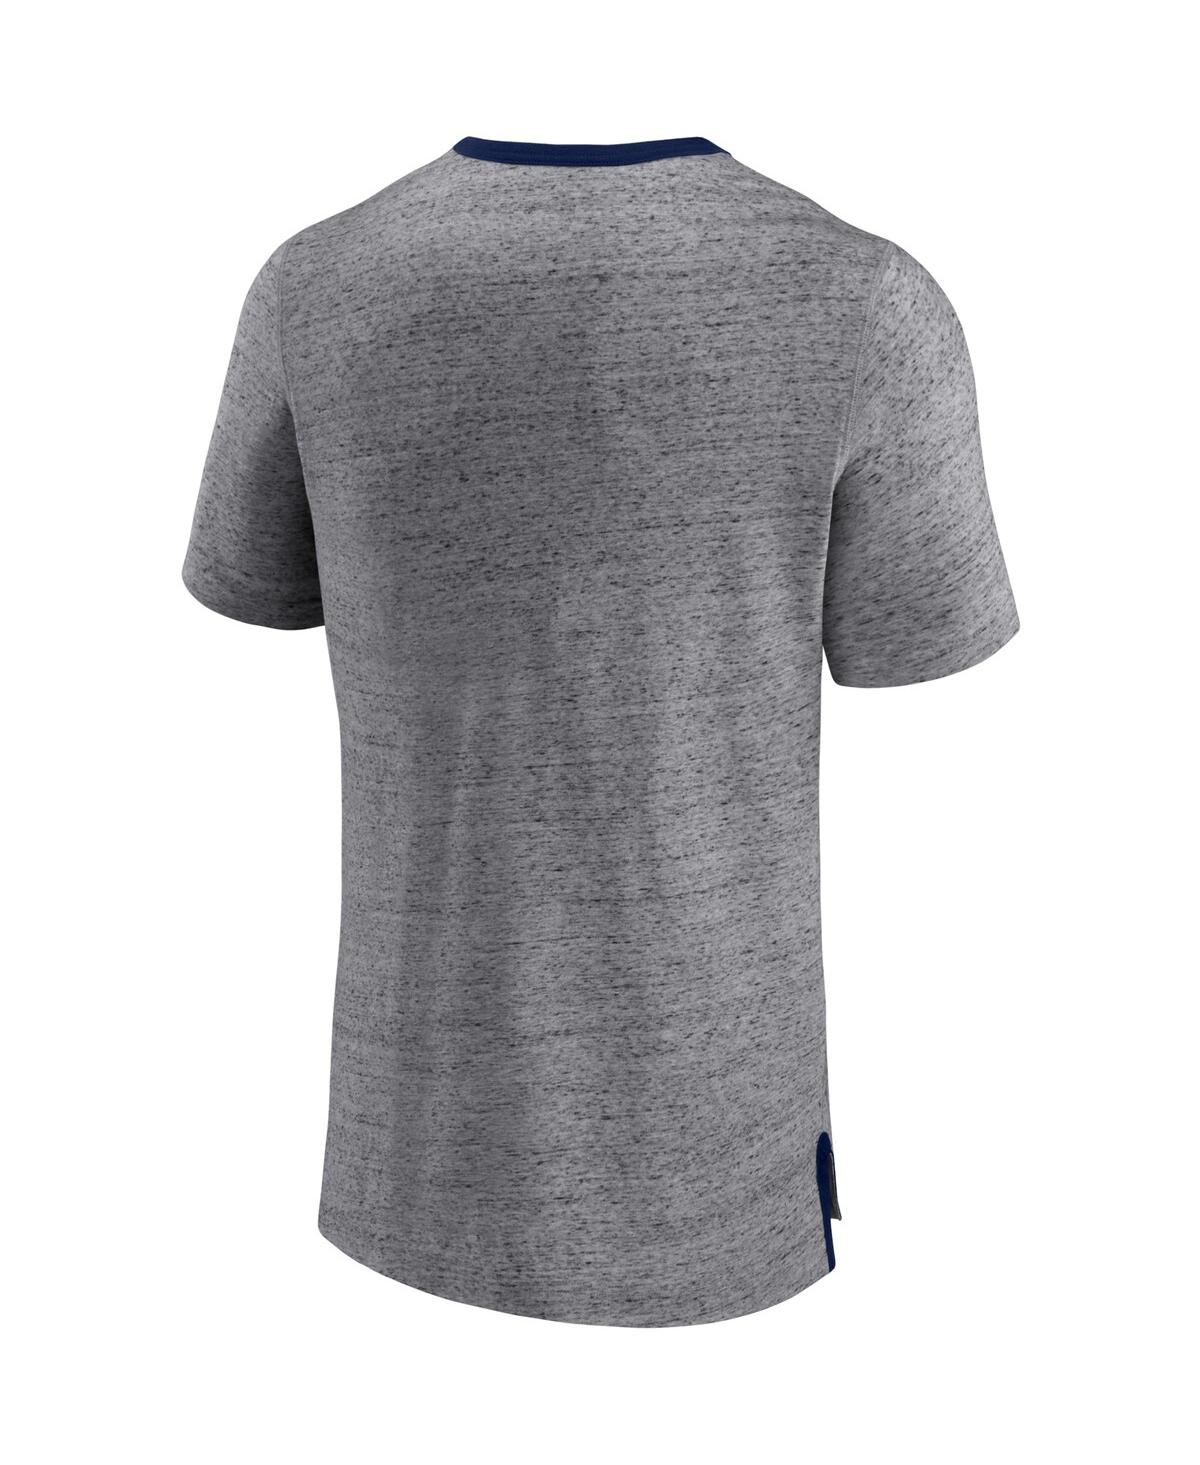 Shop Fanatics Men's  Heathered Gray Penn State Nittany Lions Personal Record T-shirt